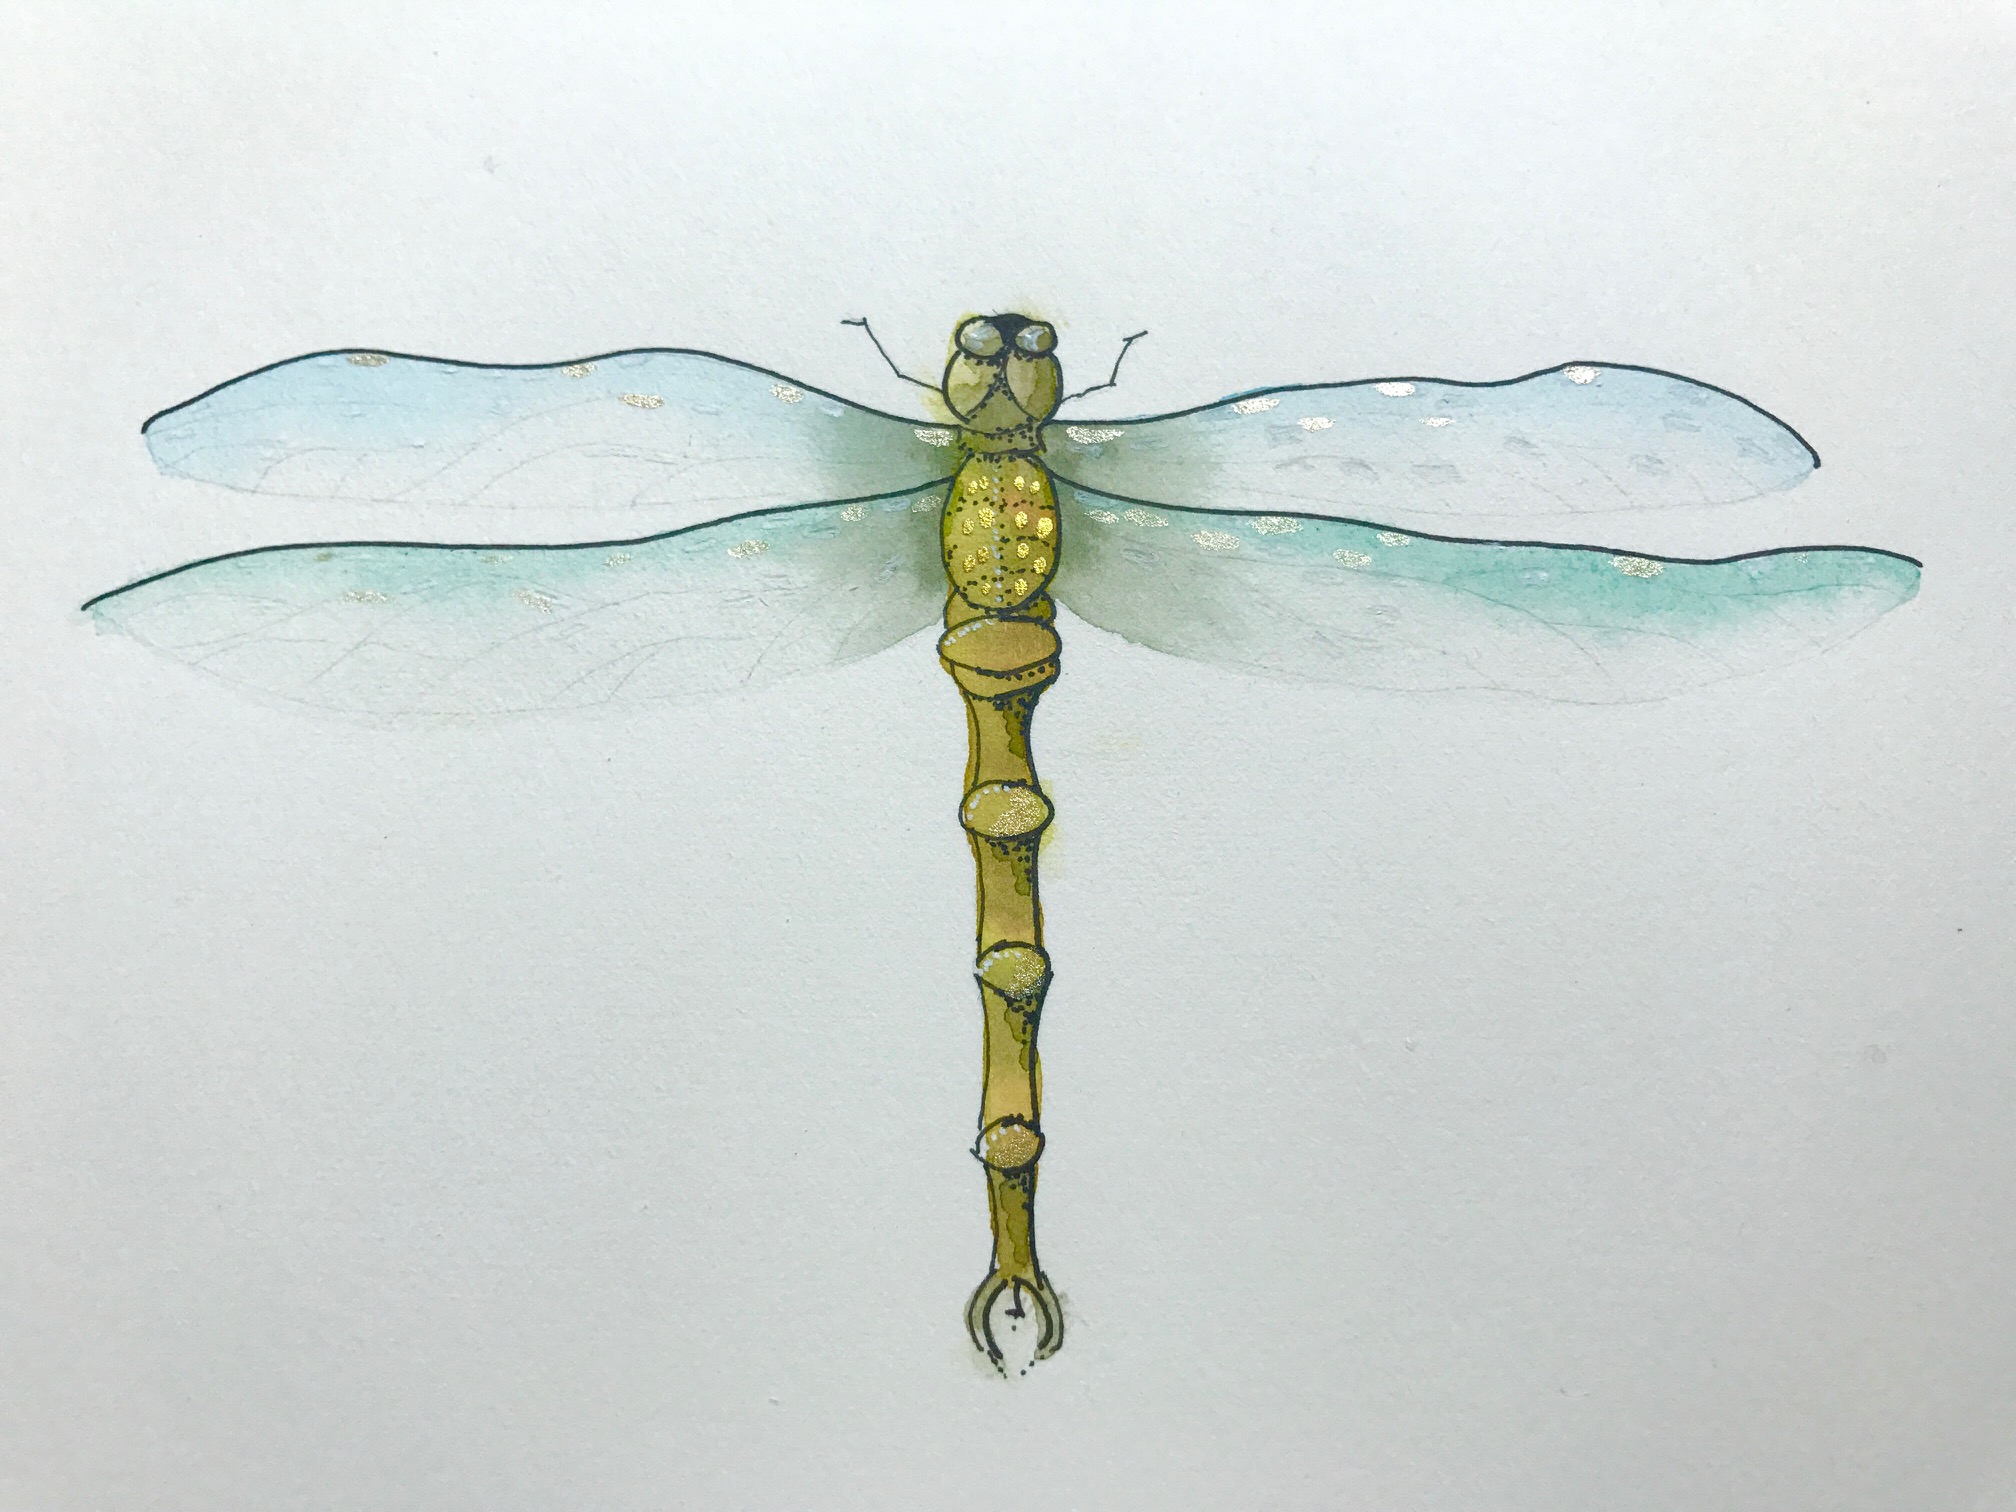 Painting Dragonflies: A Step-By-Step Guide For Watercolor Dragonflies